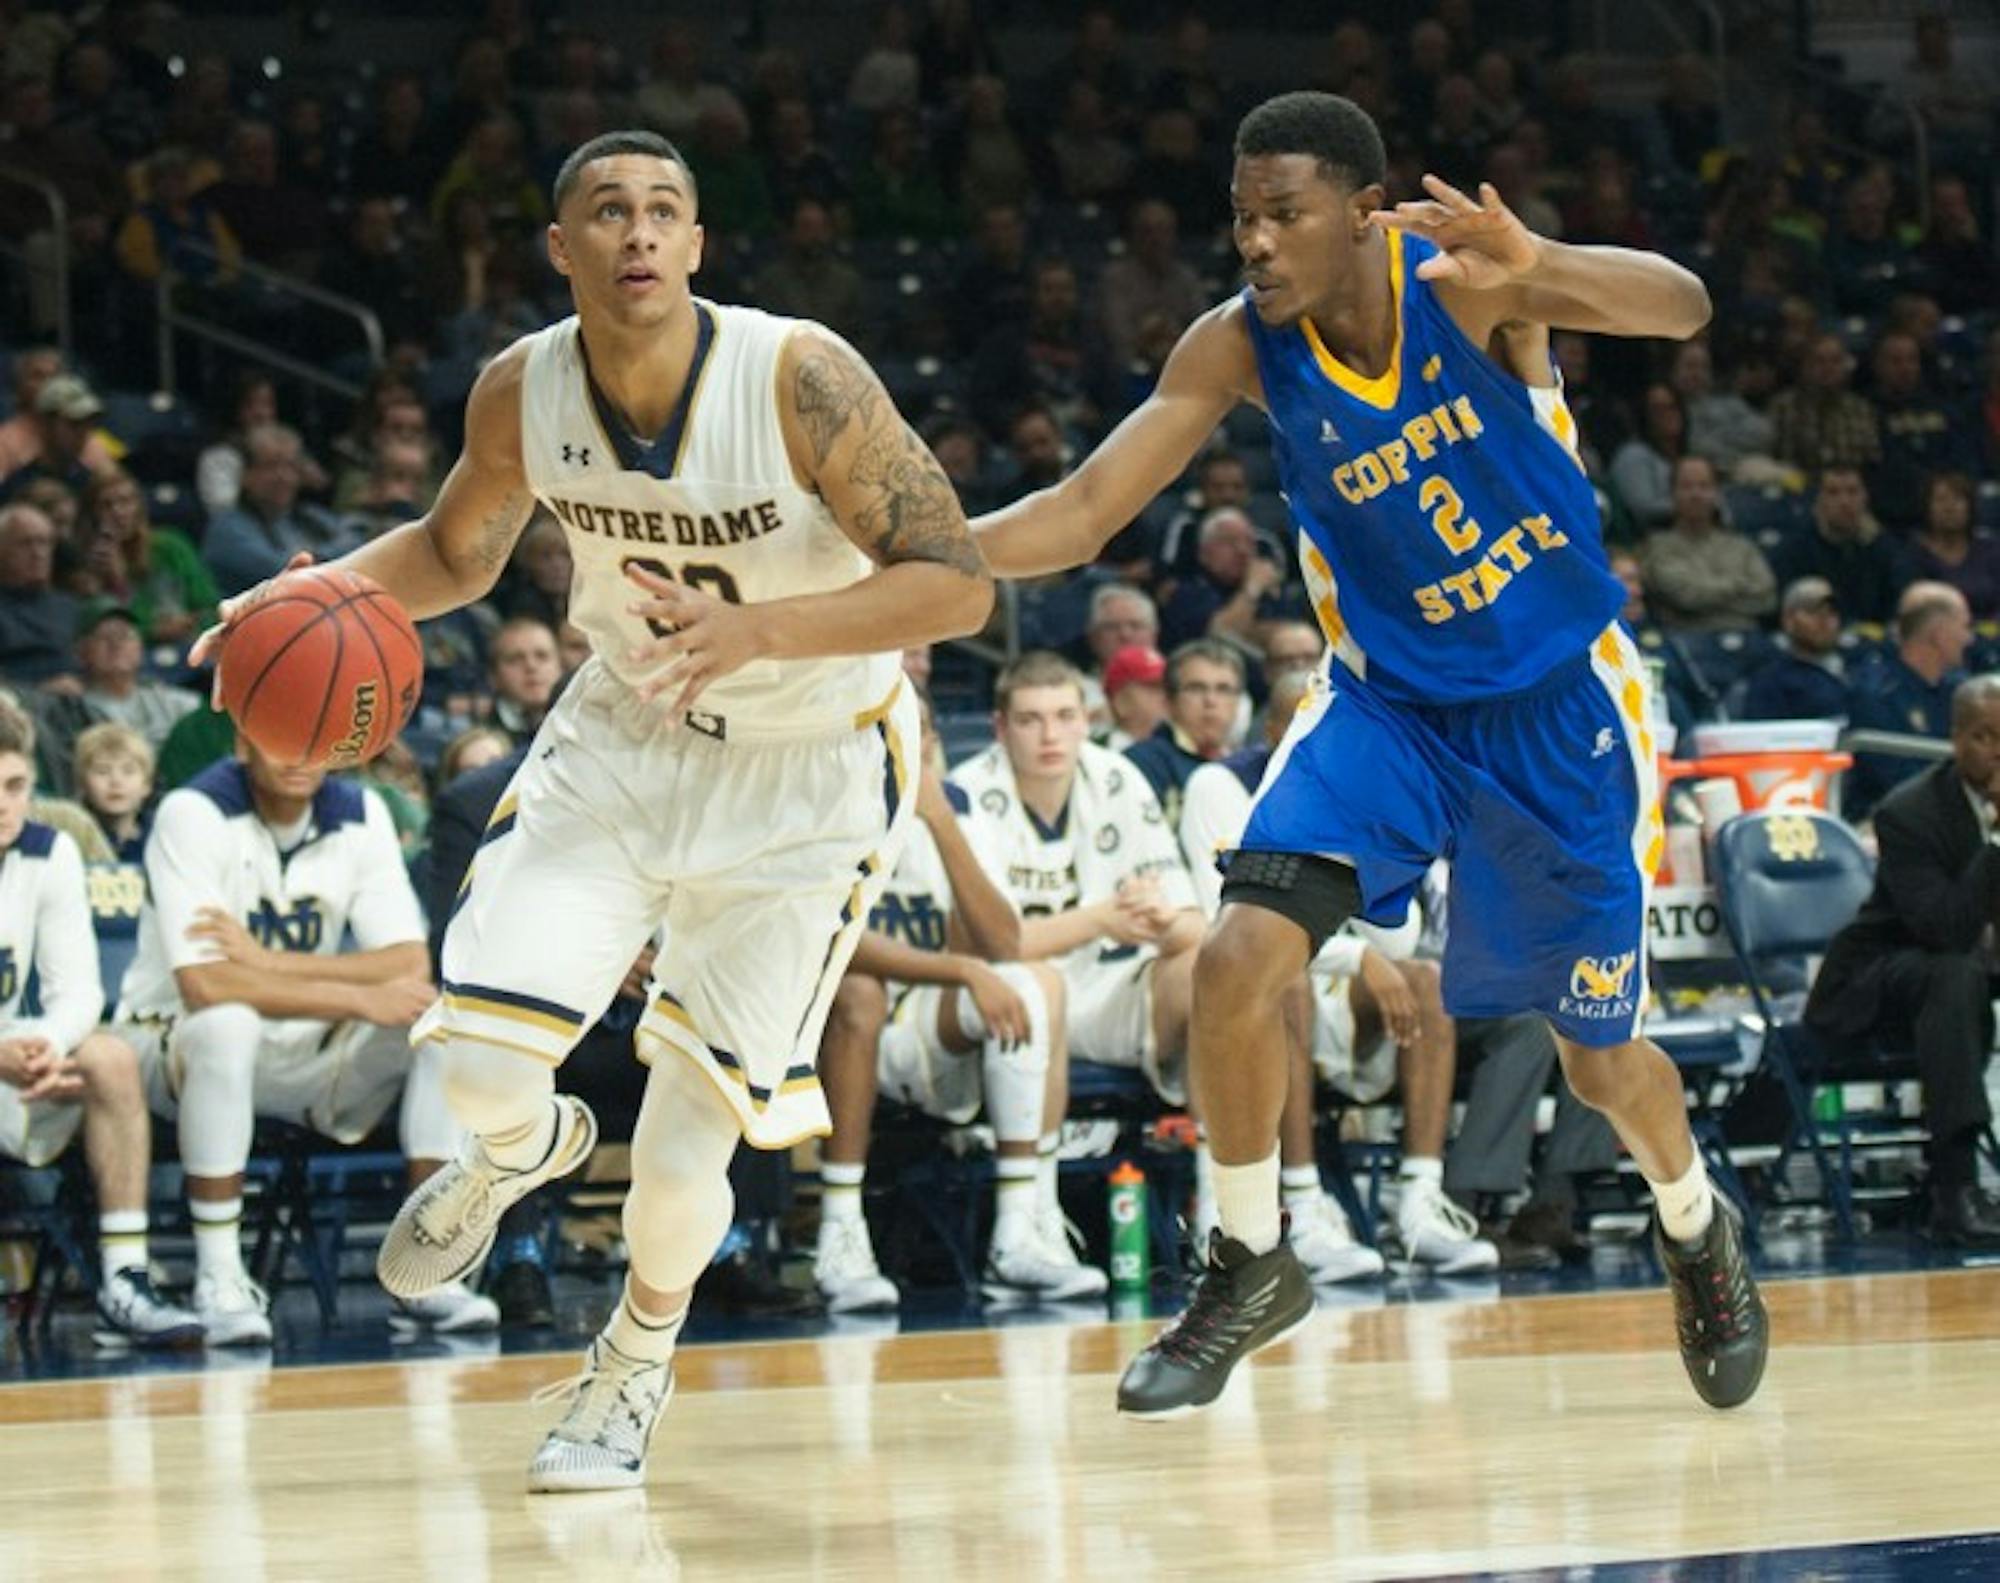 Irish junior forward Zach Auguste prepares to drive into the lane during Notre Dame’s 104-67 rout over Coppin State on Wednesday night at Purcell Pavilion. Auguste had 21 points in the game.